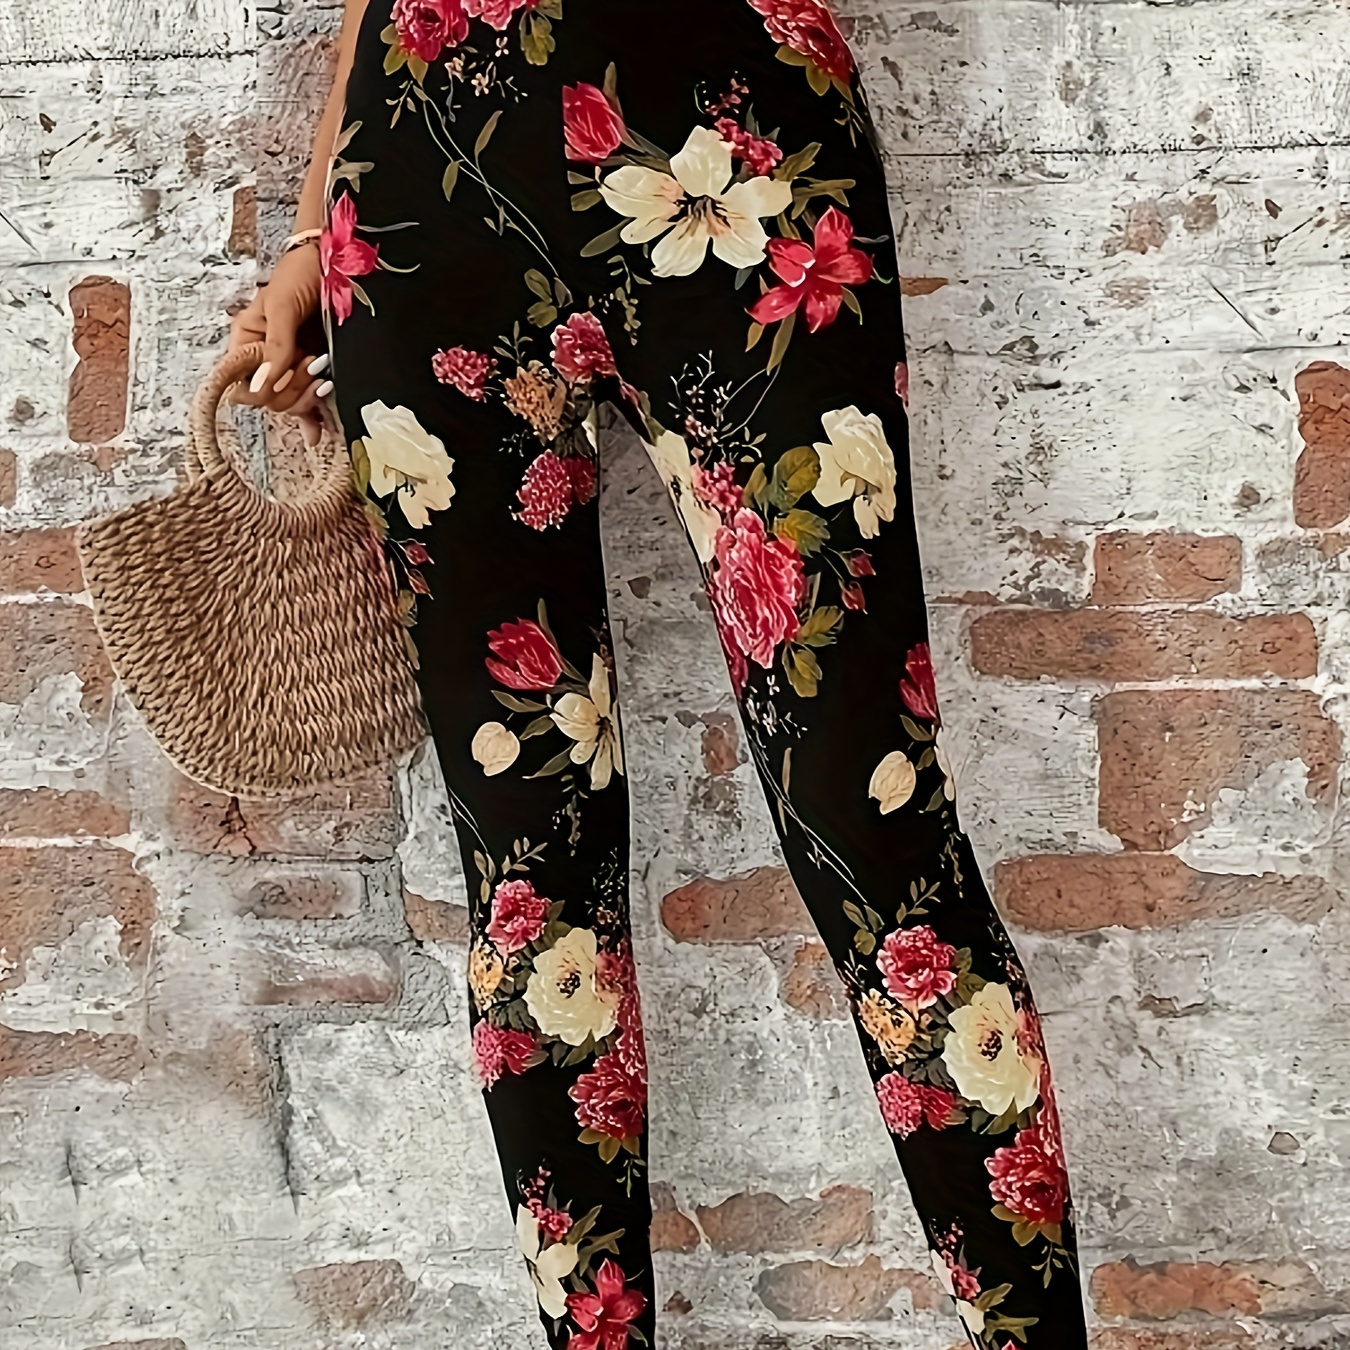 

Floral Print Skinny Leggings, Casual High Waist Stretchy Leggings For Every Day, Women's Clothing